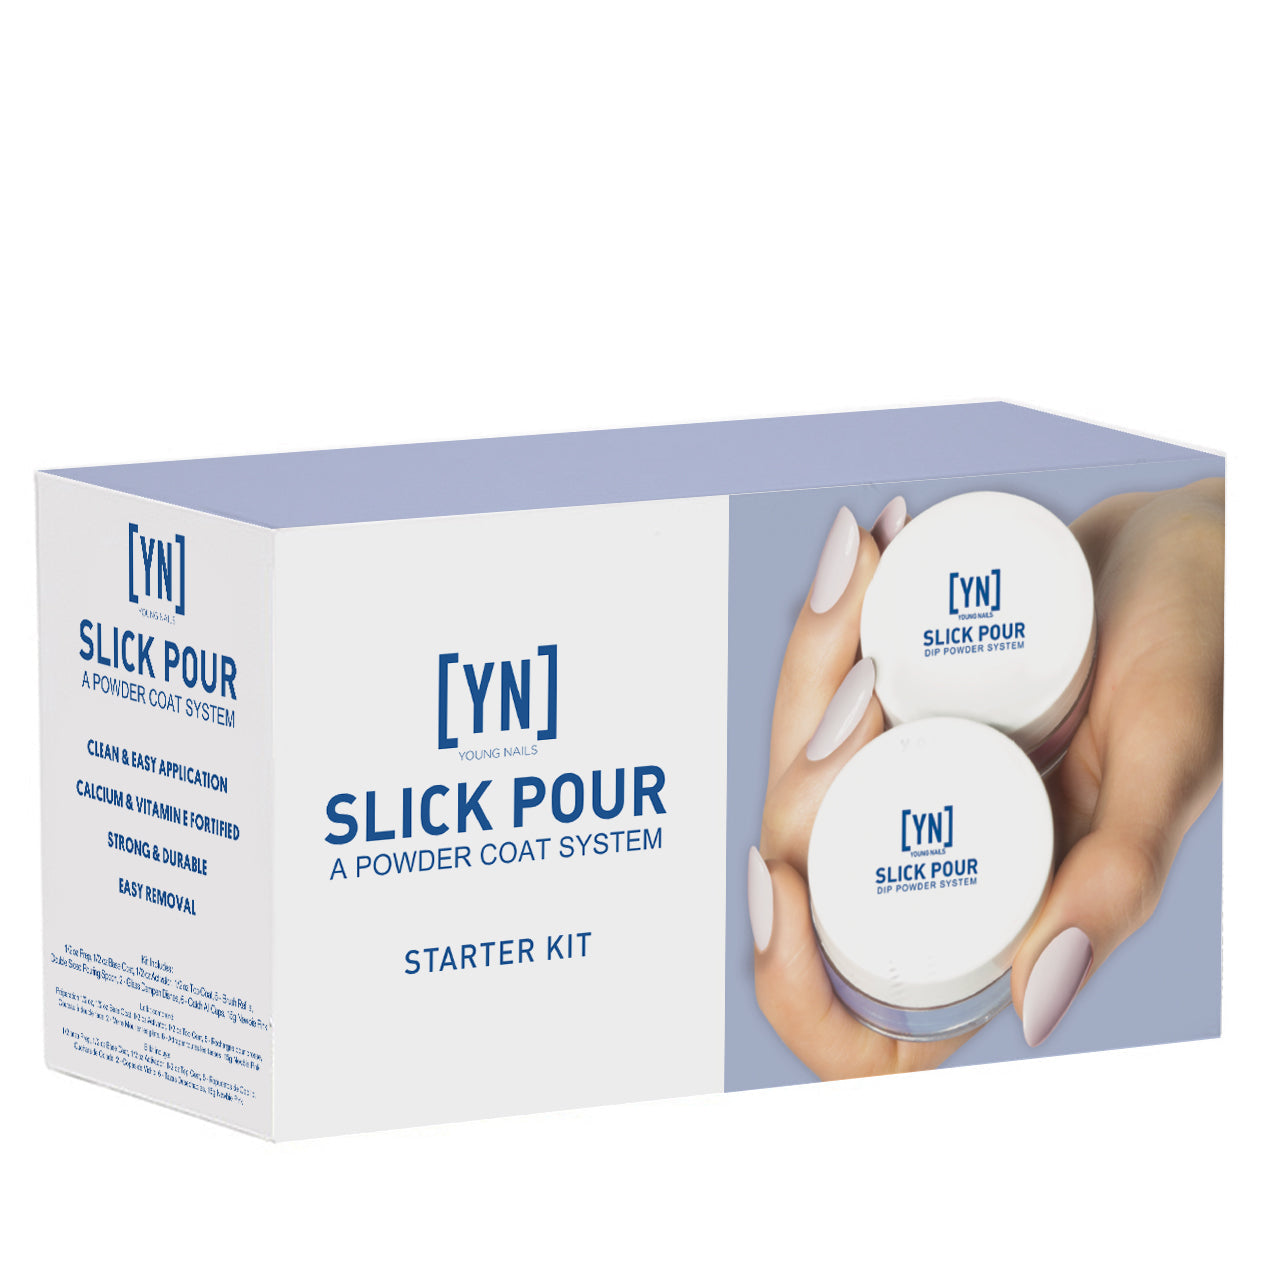 YOUNG NAILS SLICK POUR KIT